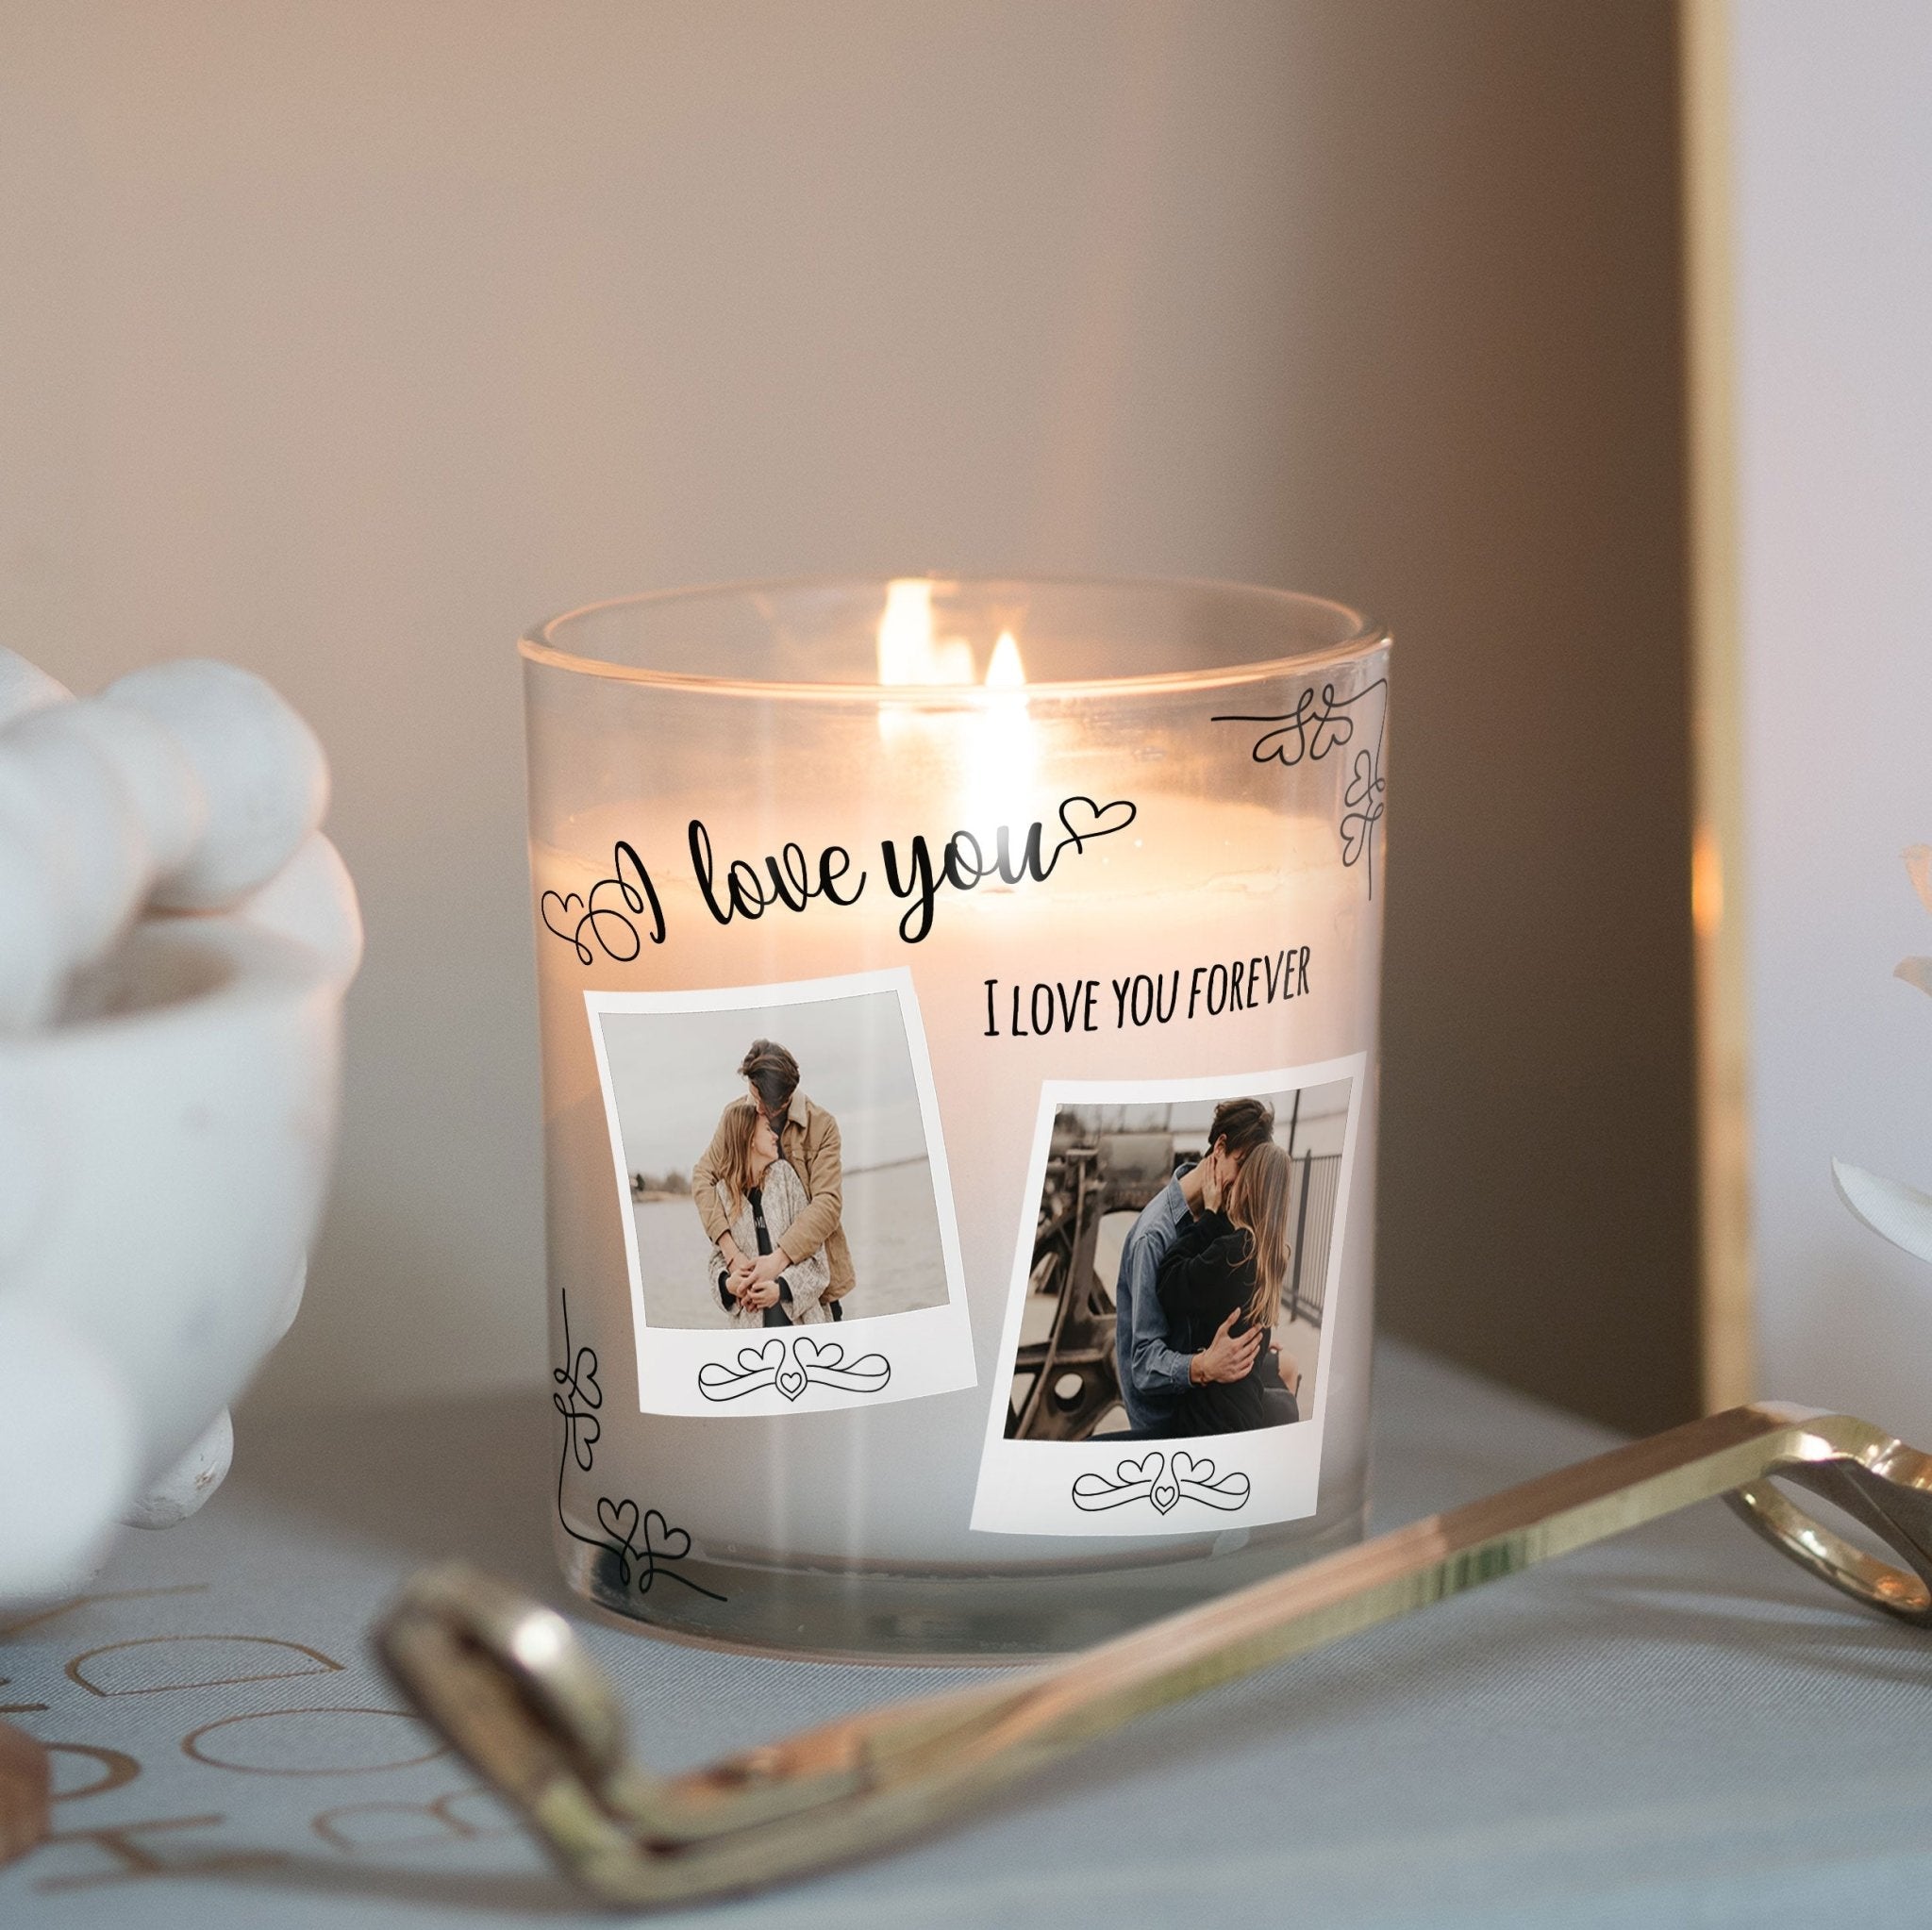 I Love You Custom Photo Candle Holder | Whimsical Hearts Gift Ideas | Personalized Votive Glass with Picture | Crystal Home Decor Present Candleholder - Unique Prints